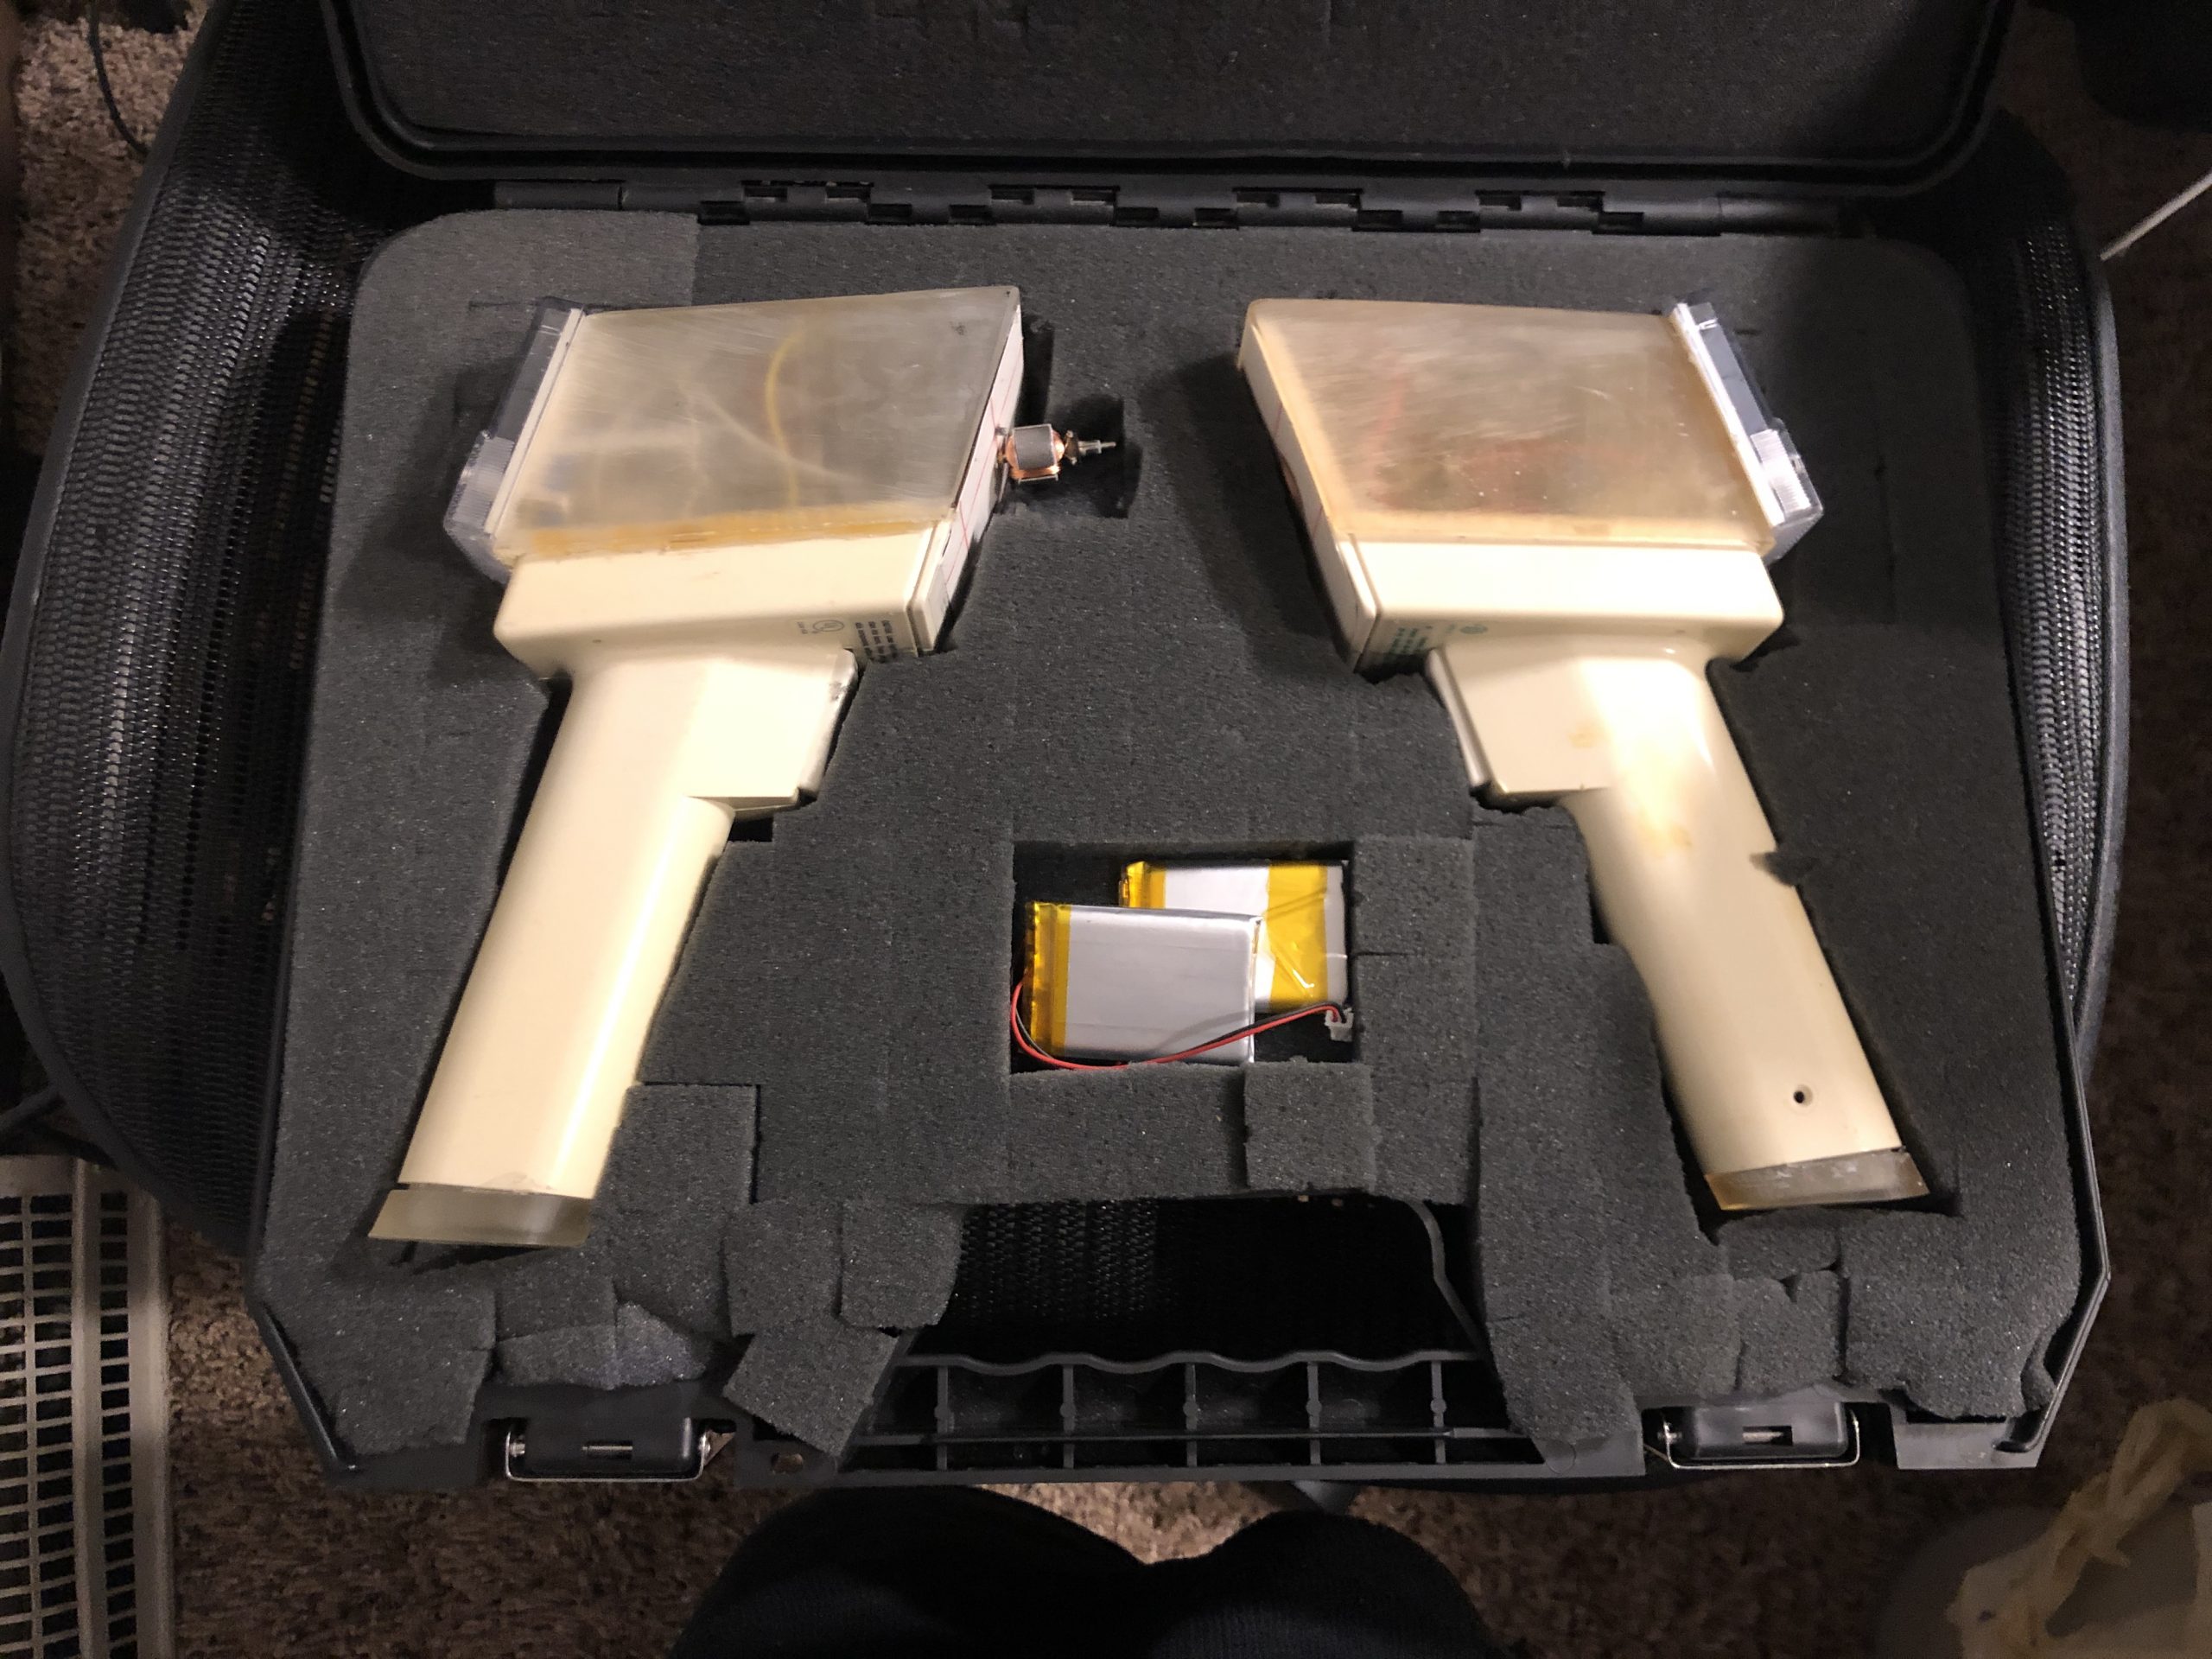 Meiger Counters in carrying case, v1 on the left and v2 on the right 